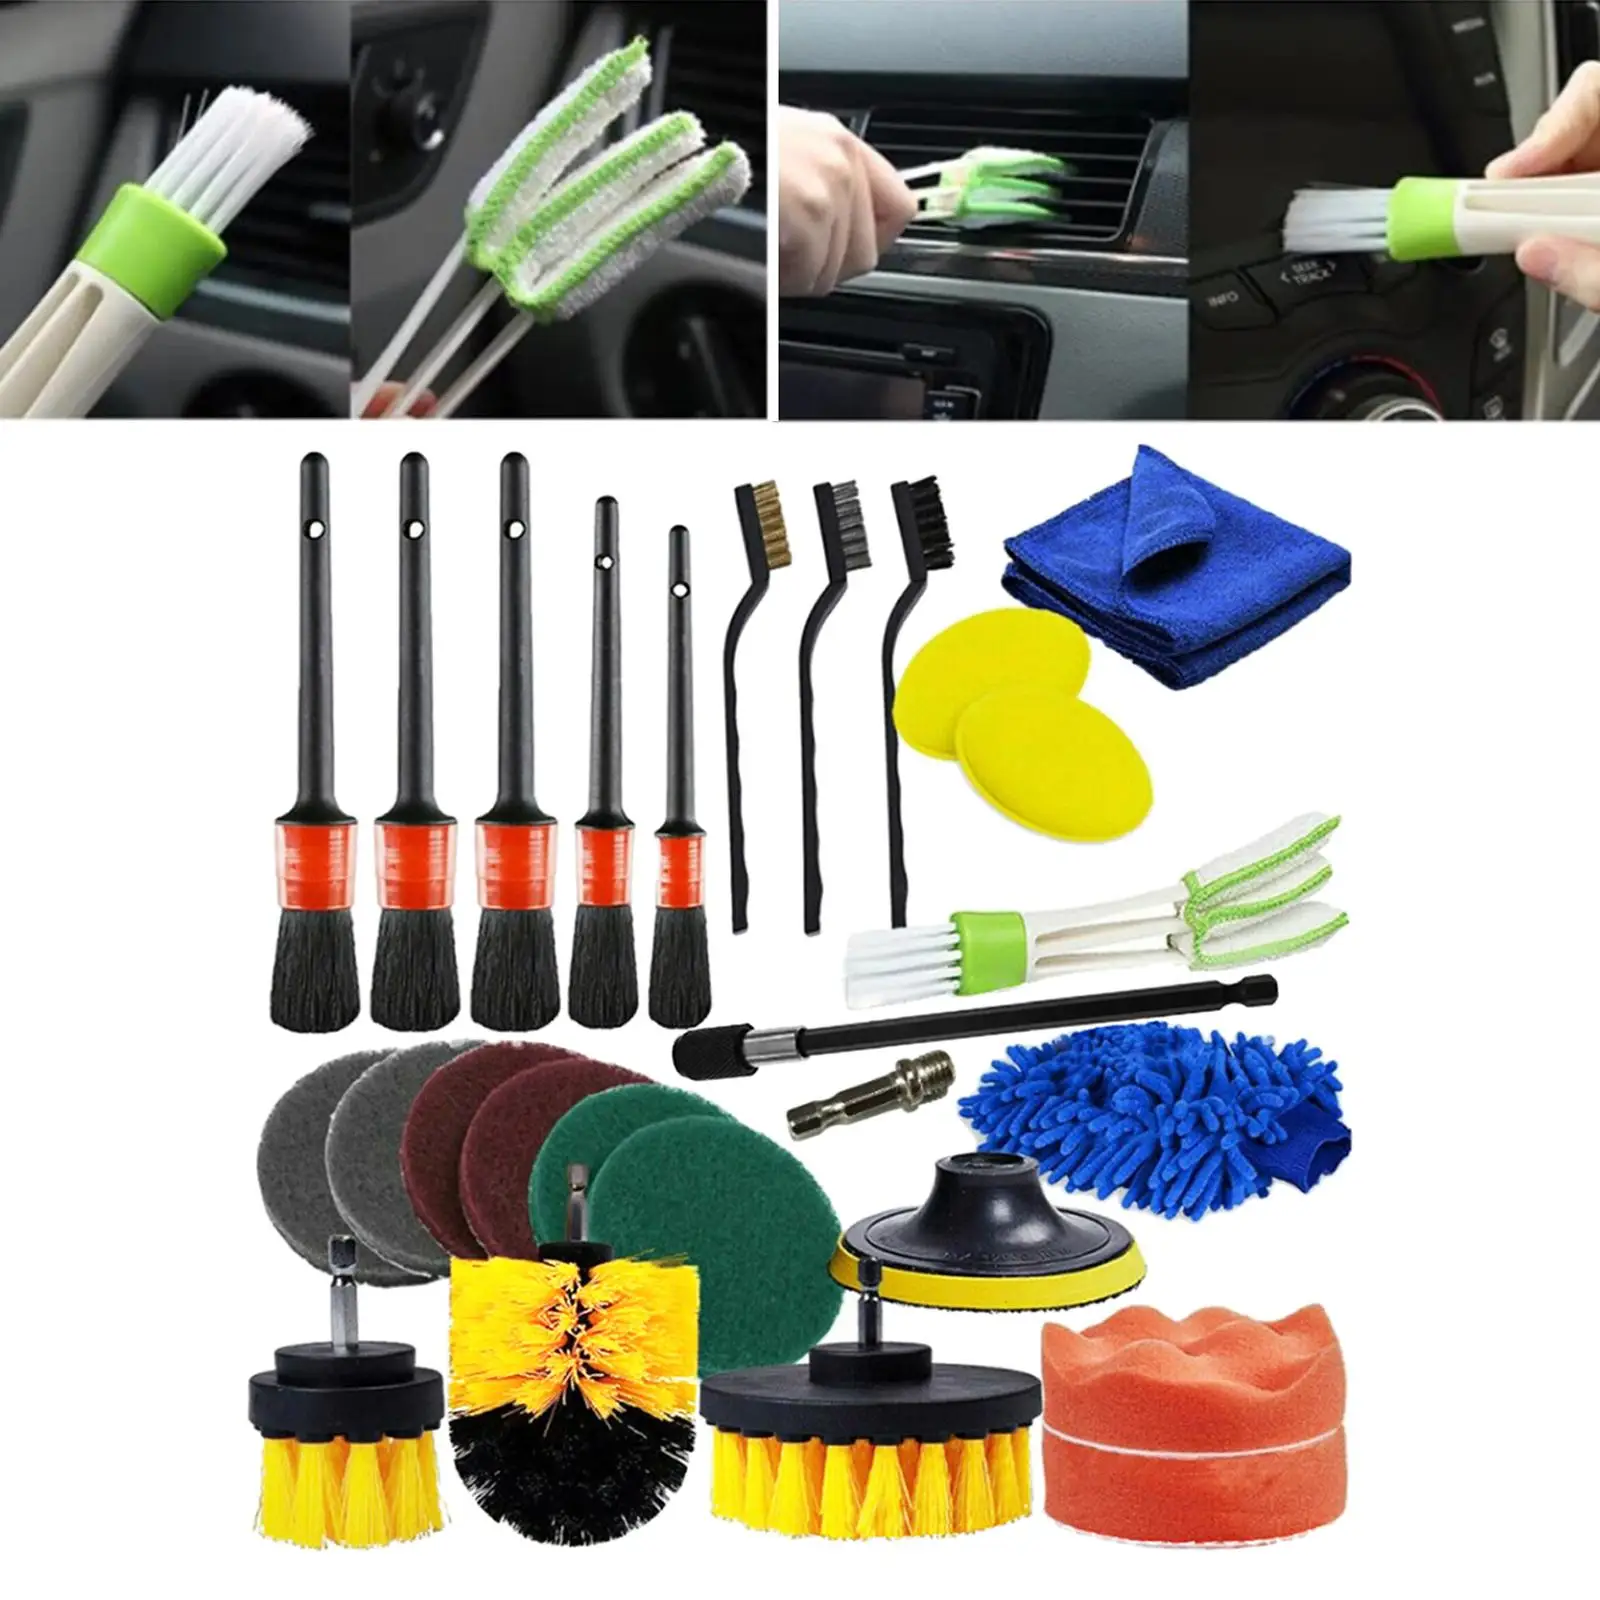 26 Pieces Auto Detailing Brushes Kit Fit for Tire Rim Inside Outside Clean